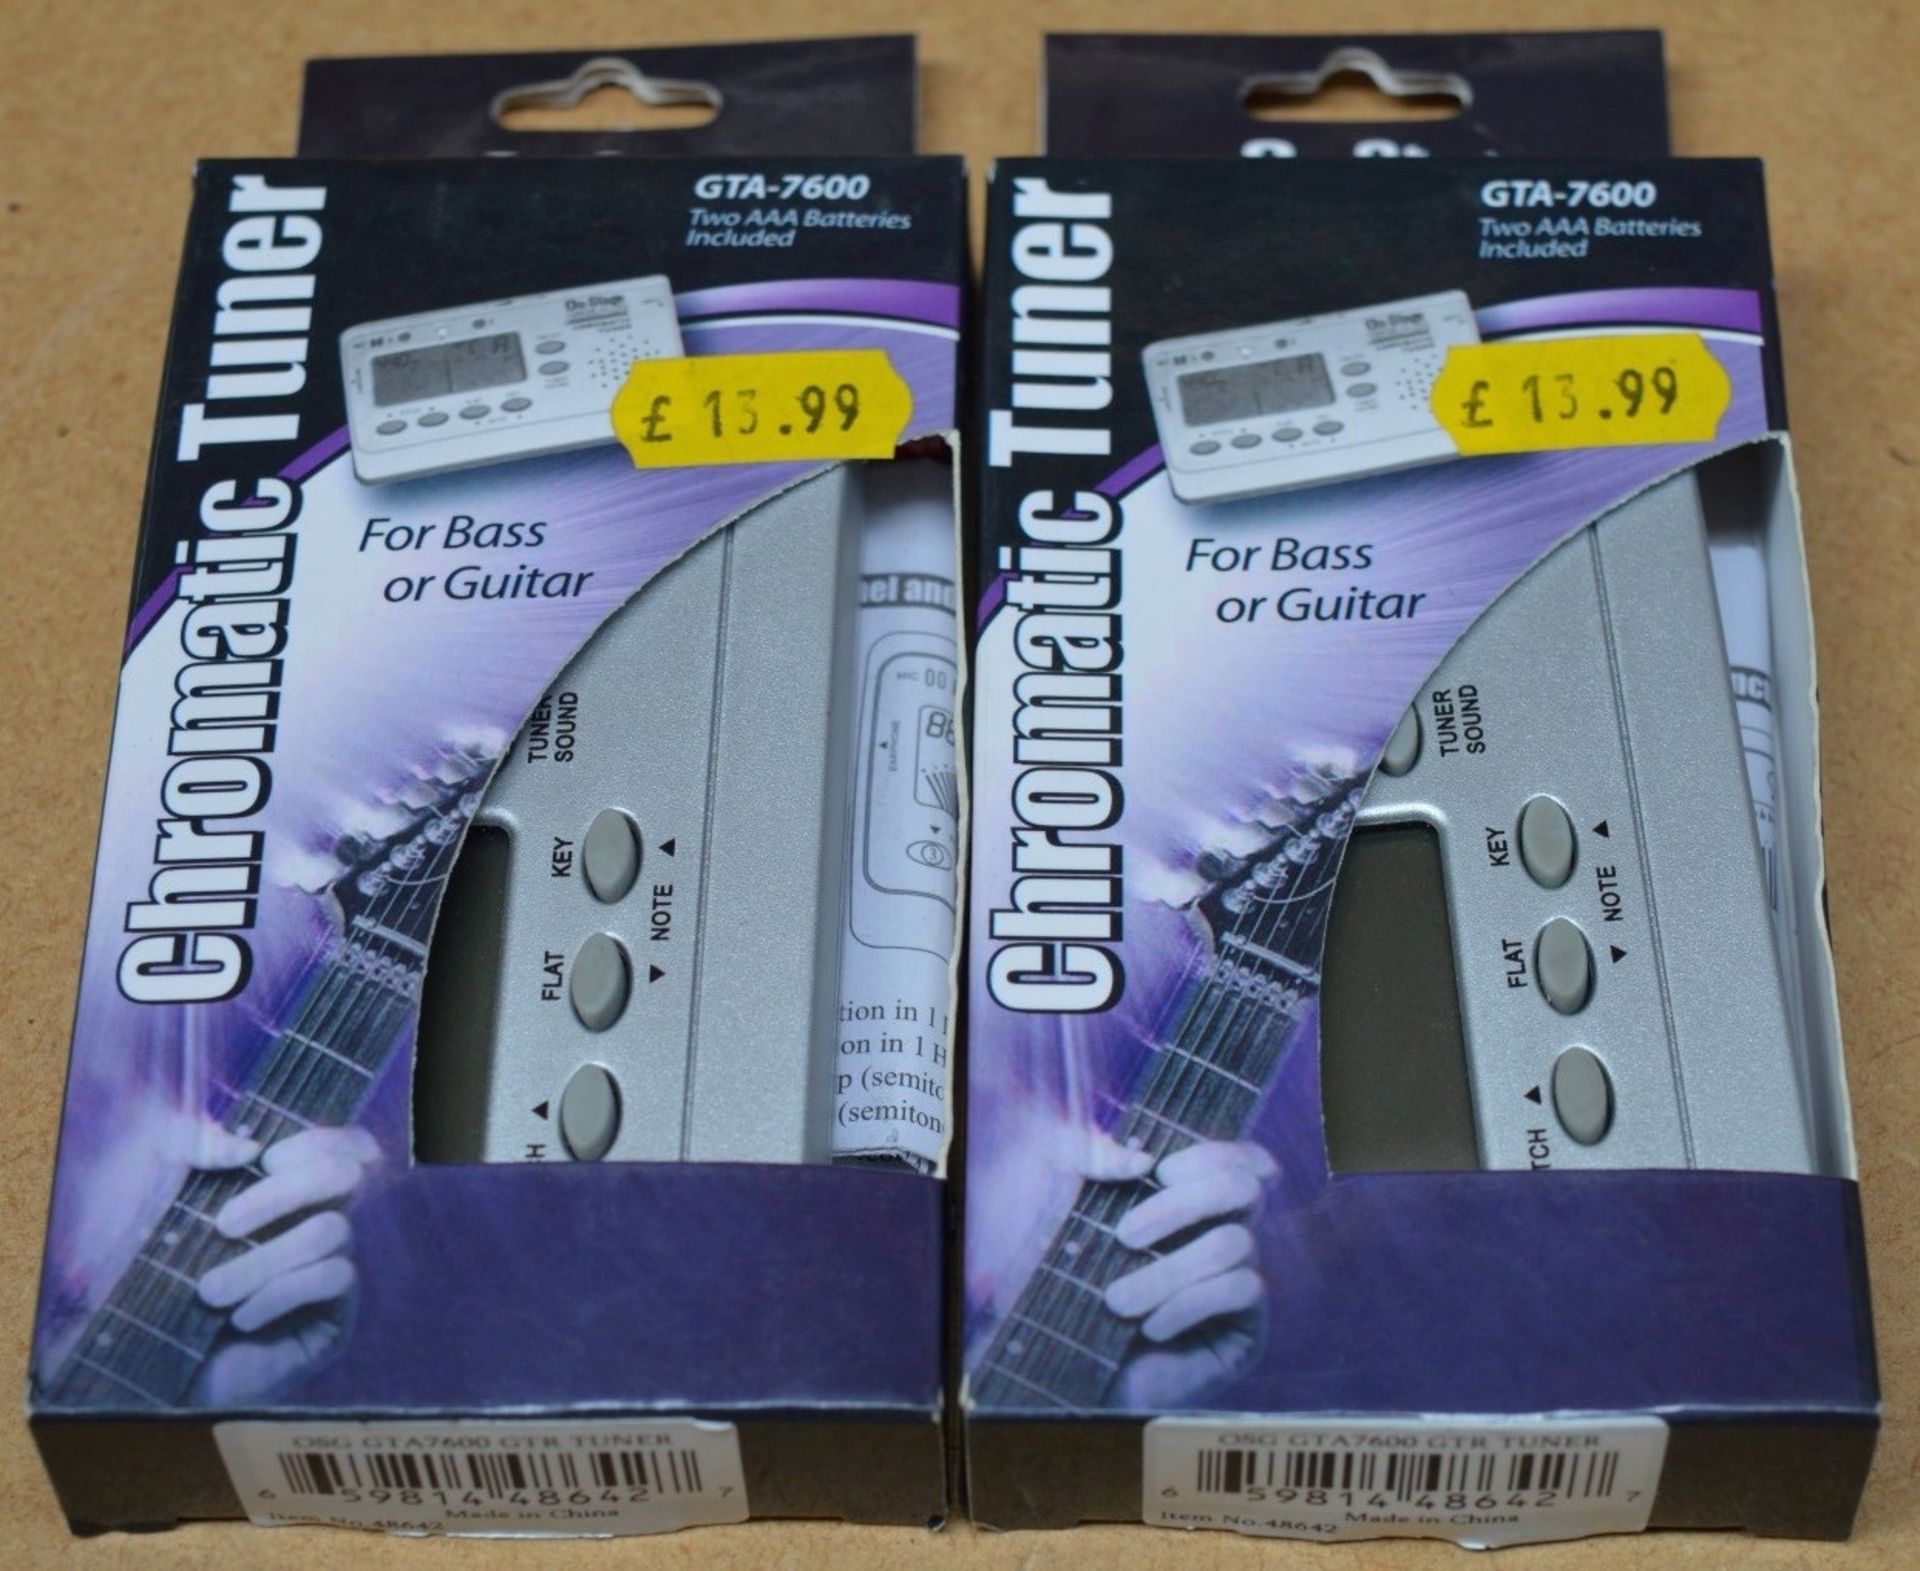 2 x On-Stage Gear GTA-7600 Guitar & Bass Chromatic Tuners - New and Boxed - CL020 - Location: